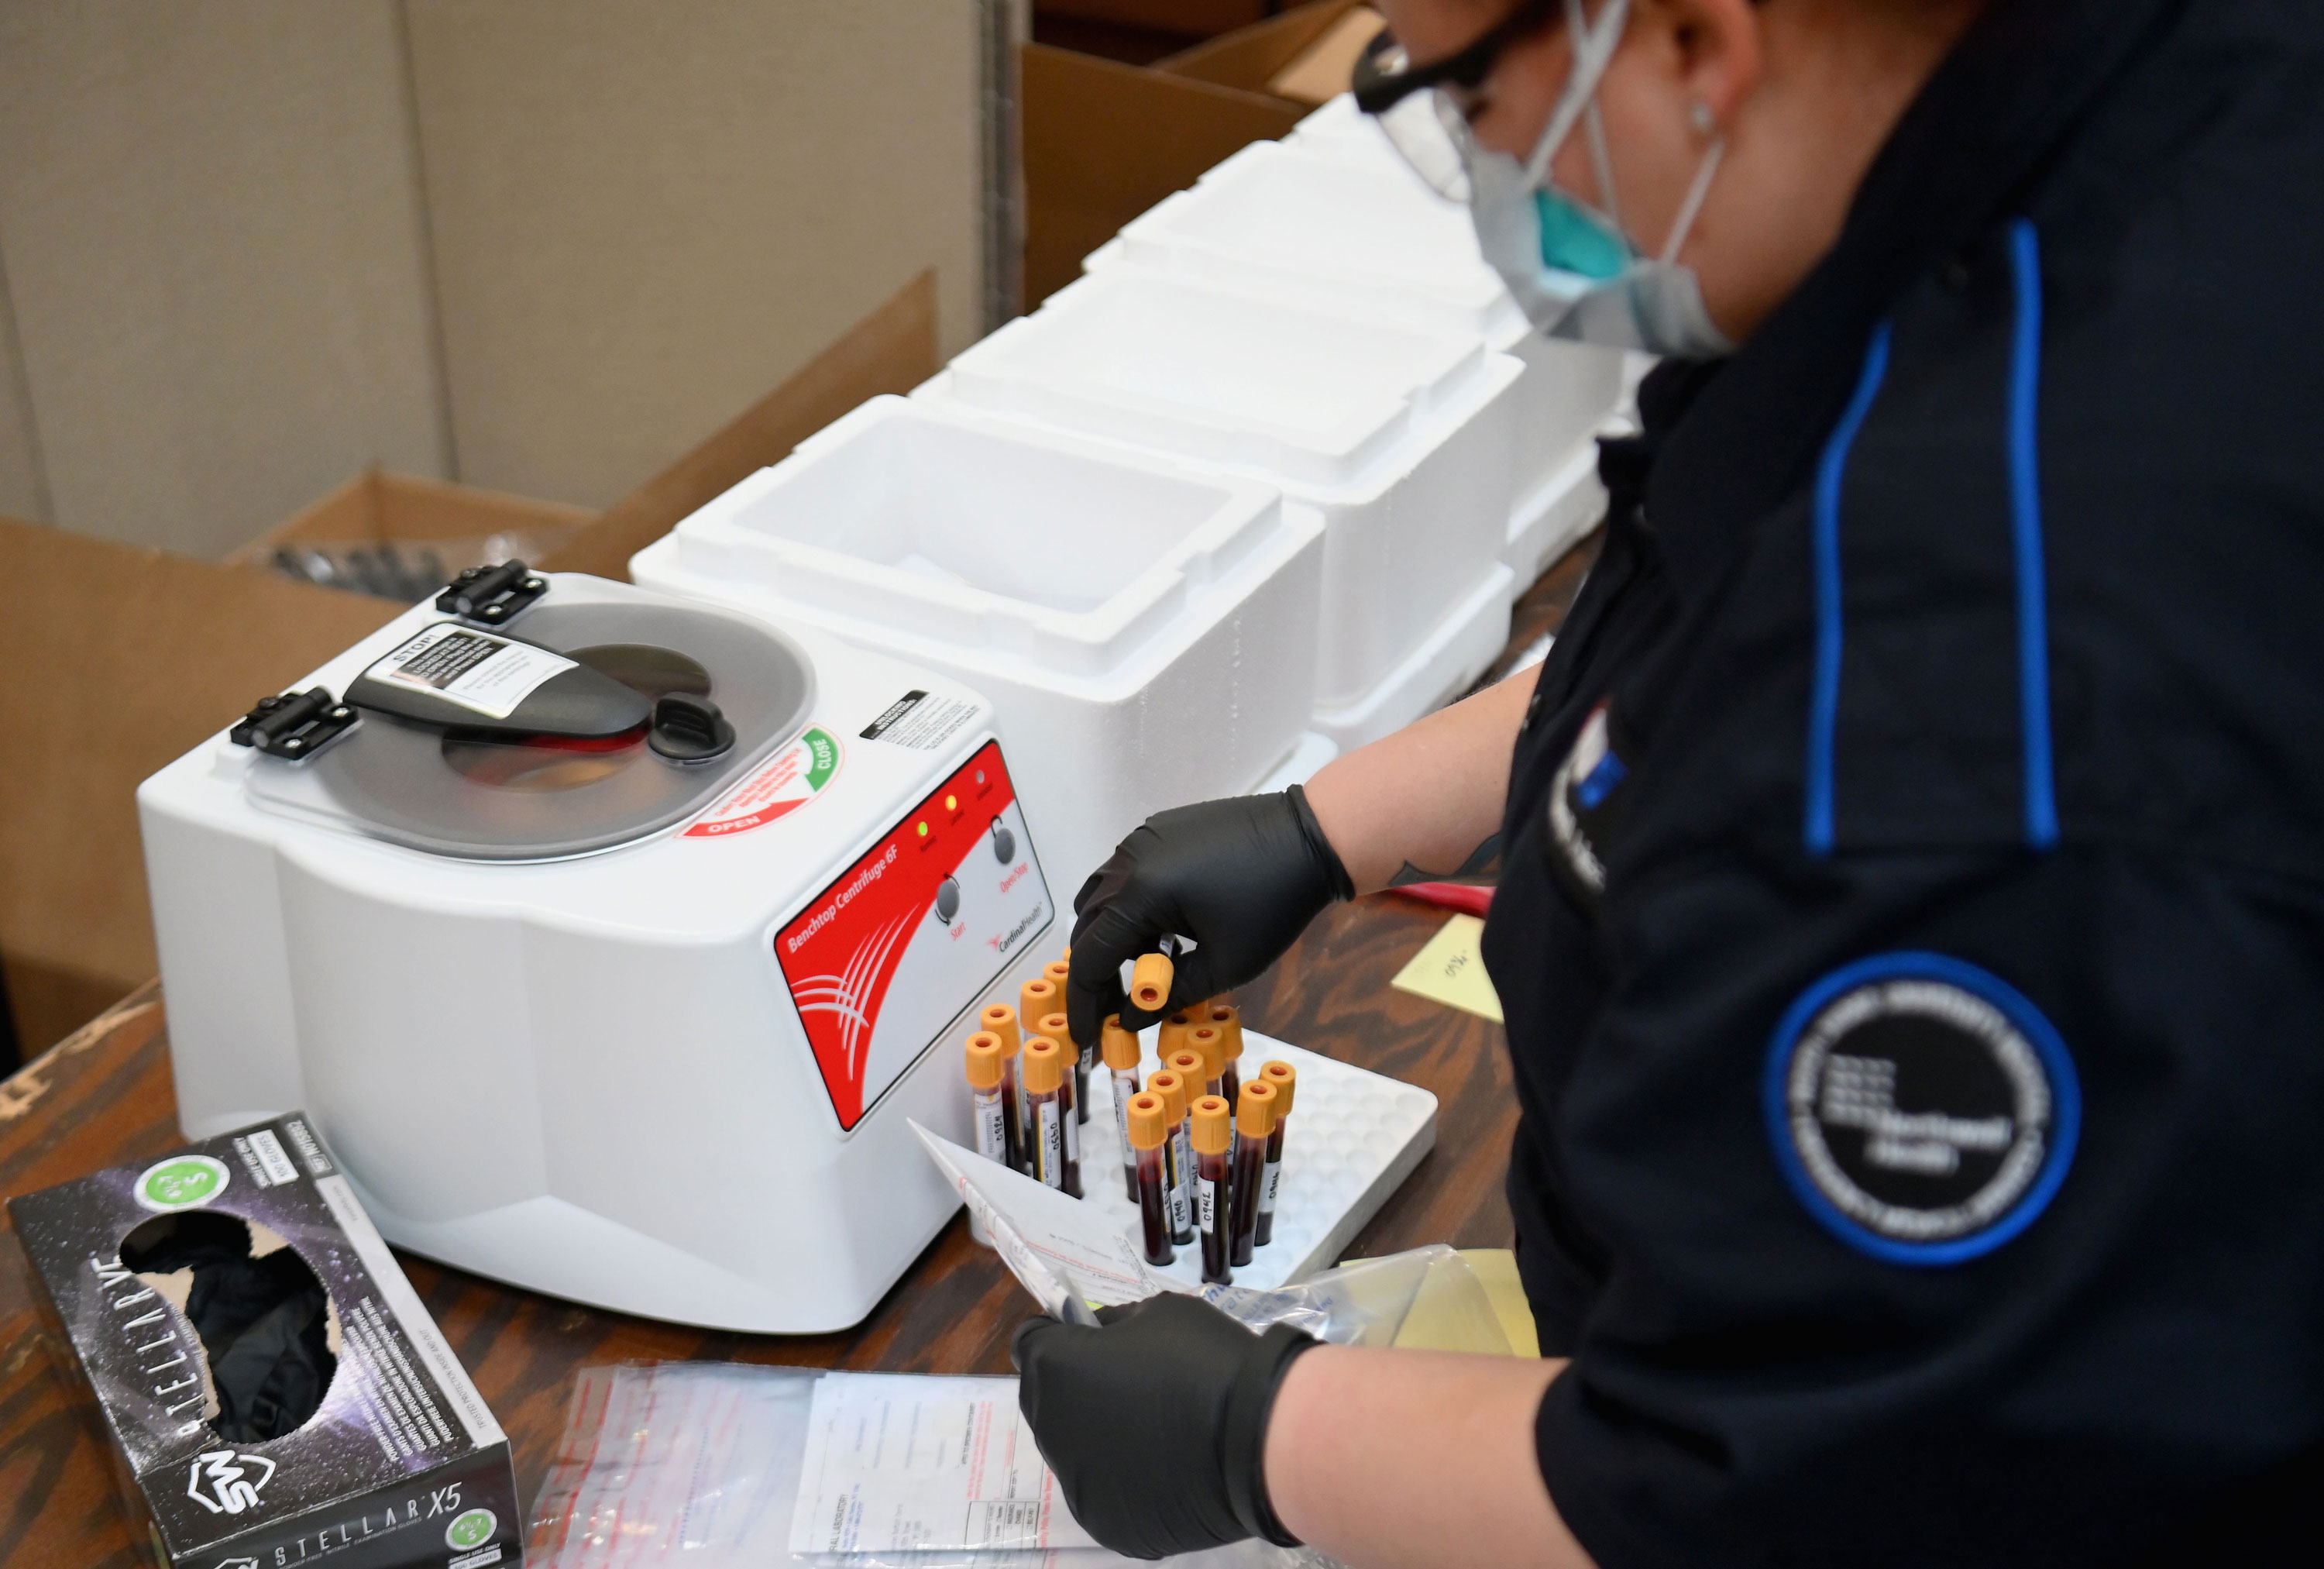 An Emergency medical Technician sorts through blood samples to test for COVID-19 antibodies at Abyssinian Baptist Church in the Harlem neighborhood of New York on May 14.